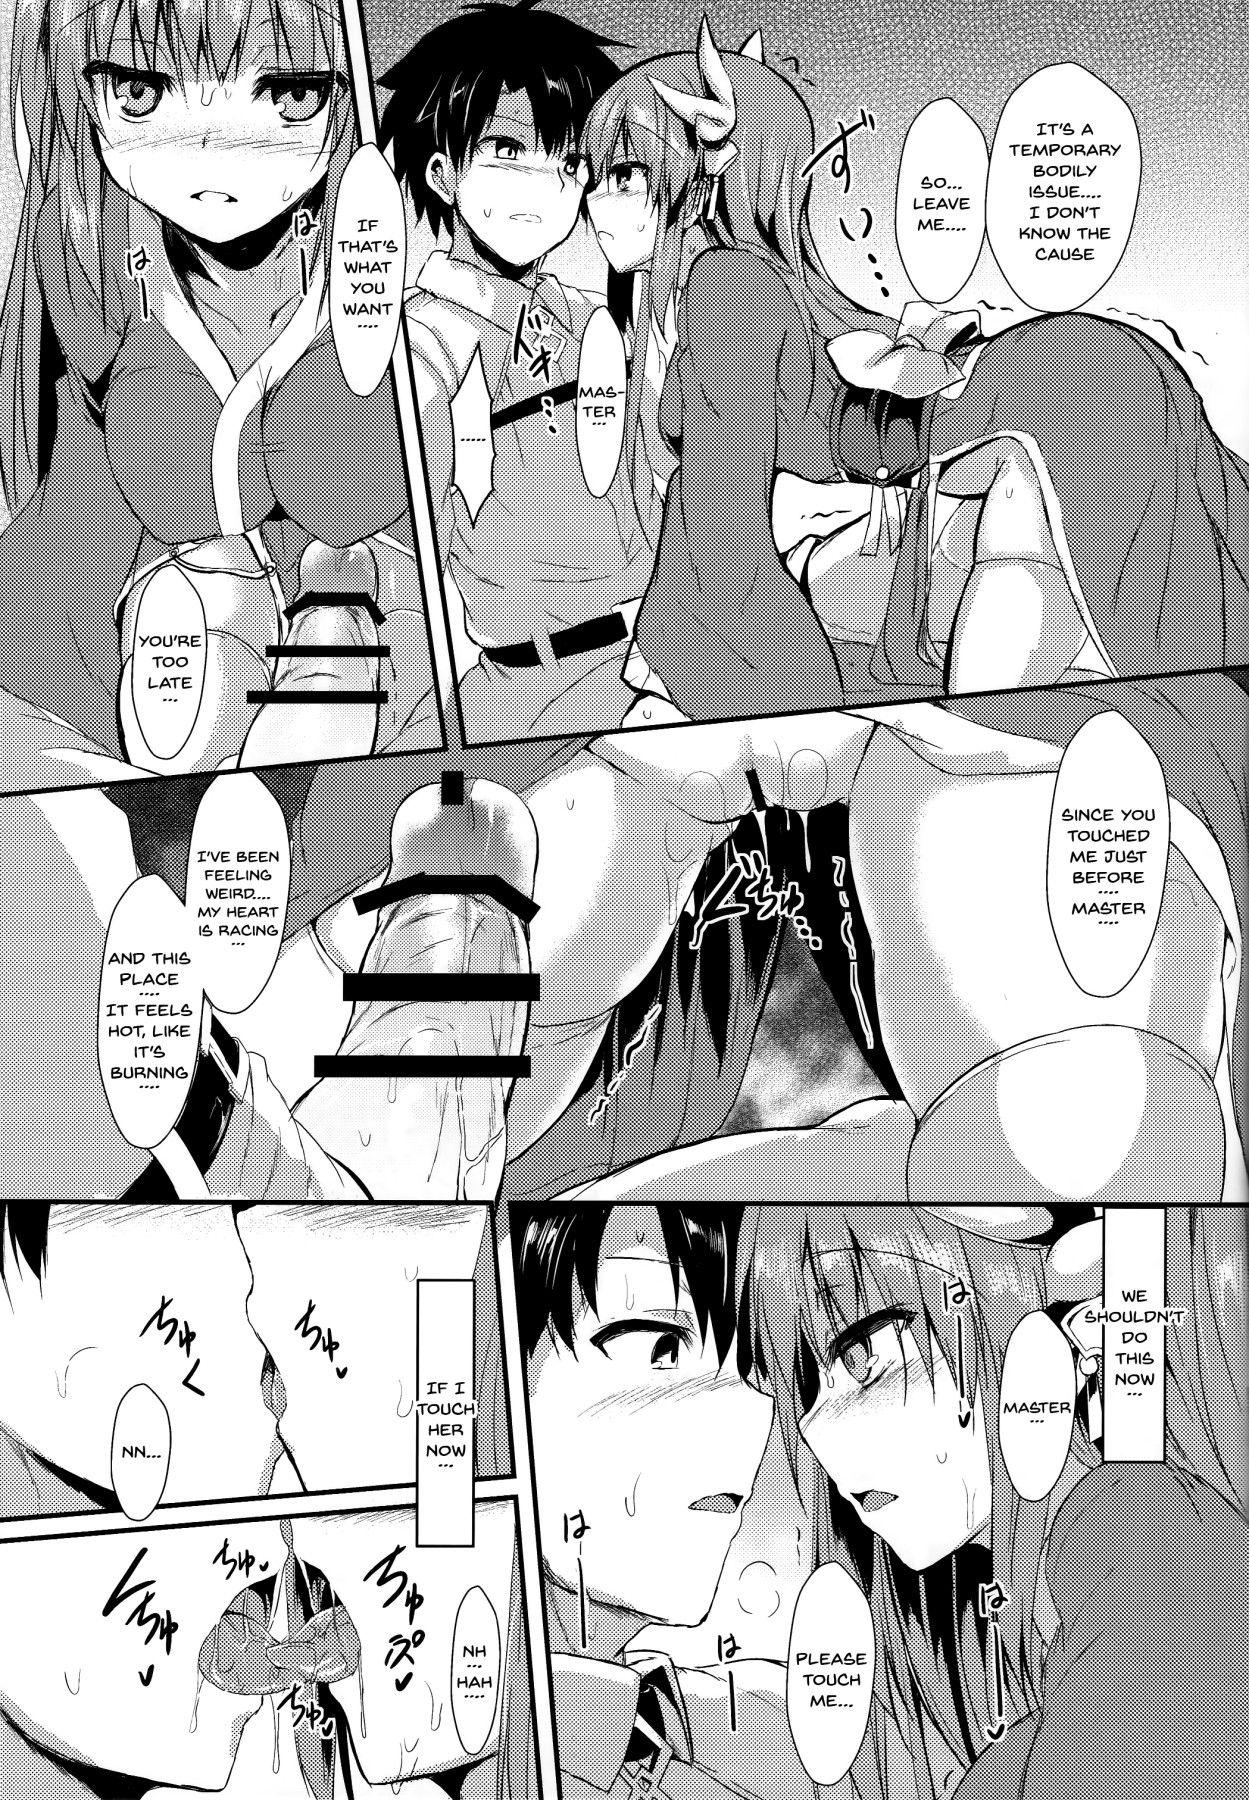 Babes (C93) [ASTRONOMY (SeN)] Kiyohii no Hon (Yon) | Kiyohii's Book (Four) (Fate/Grand Order) [English] {Doujins.com} - Fate grand order Pussyfucking - Page 8